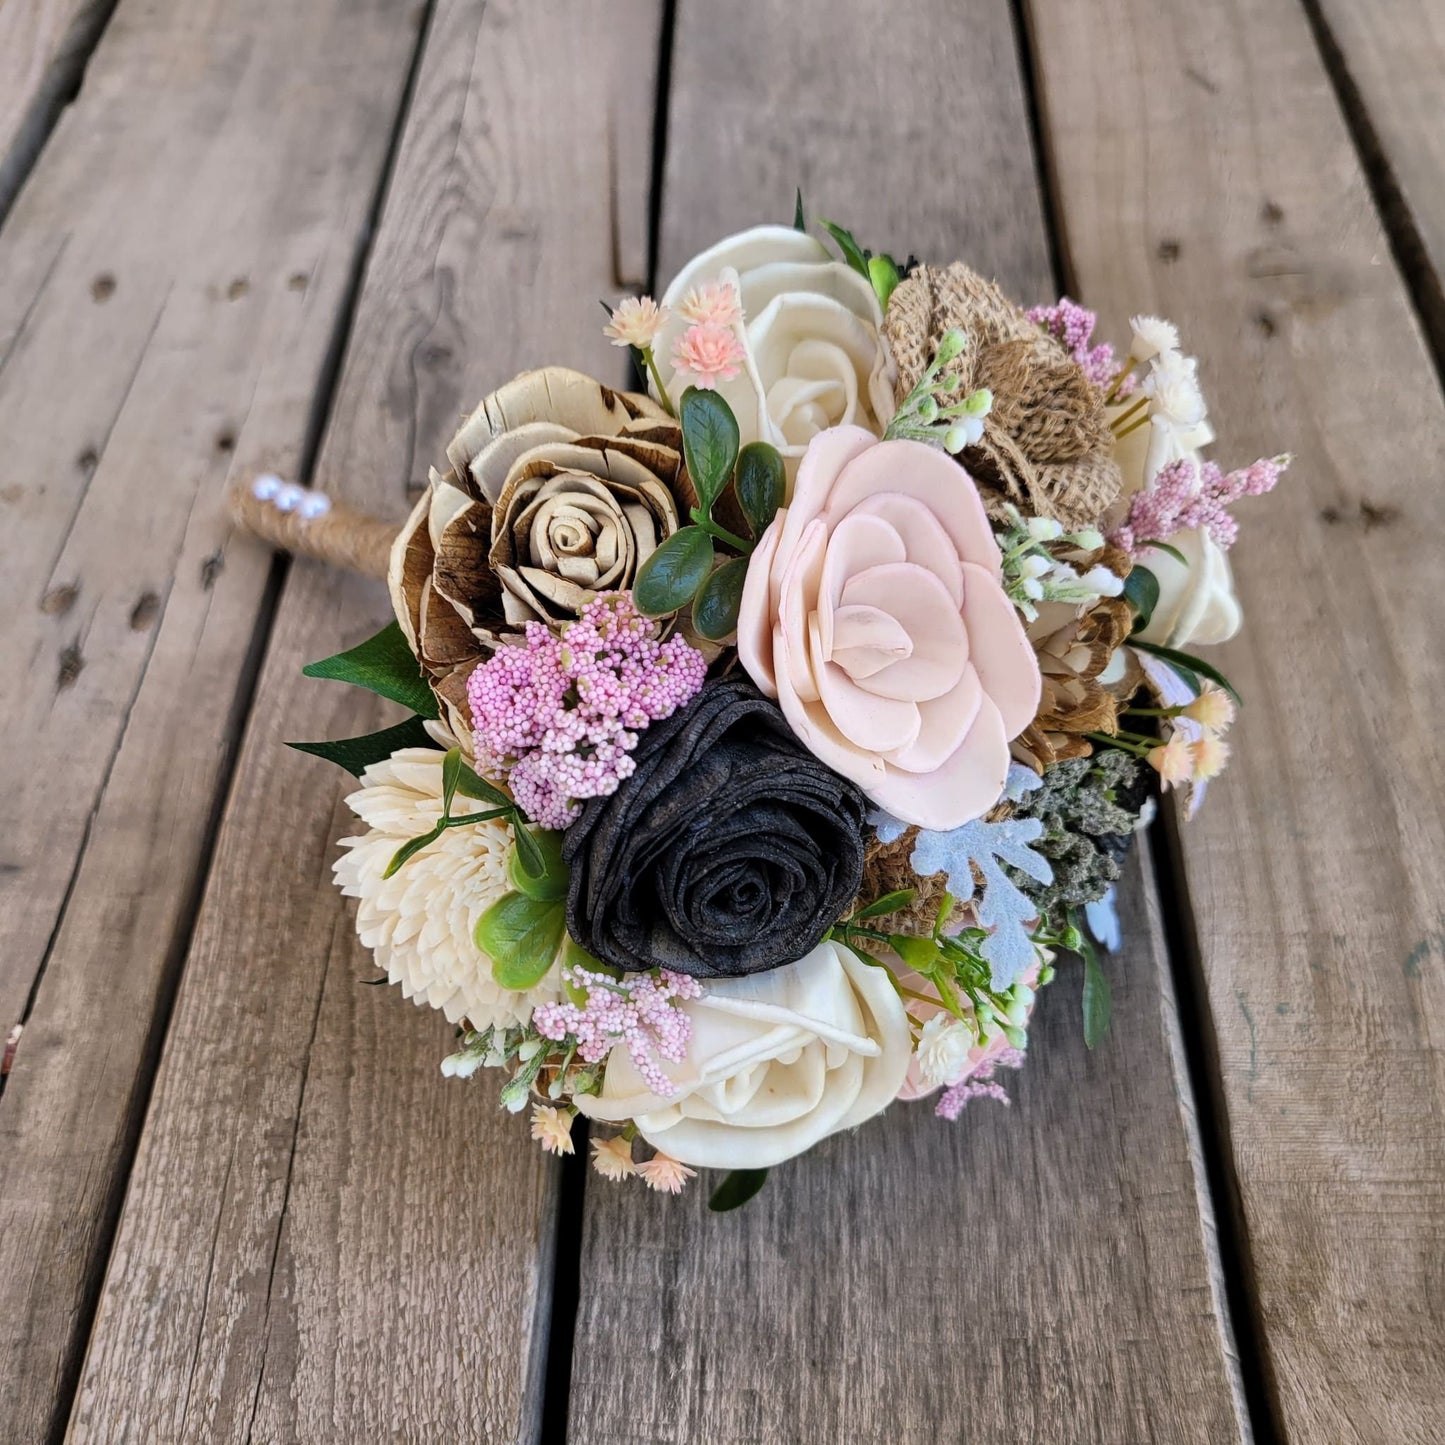 Rustic Black and Light Pink Wood Flower Bouquet, Sola Wood Flowers with Burlap Flowers, Bride or Bridesmaid Wedding Florals